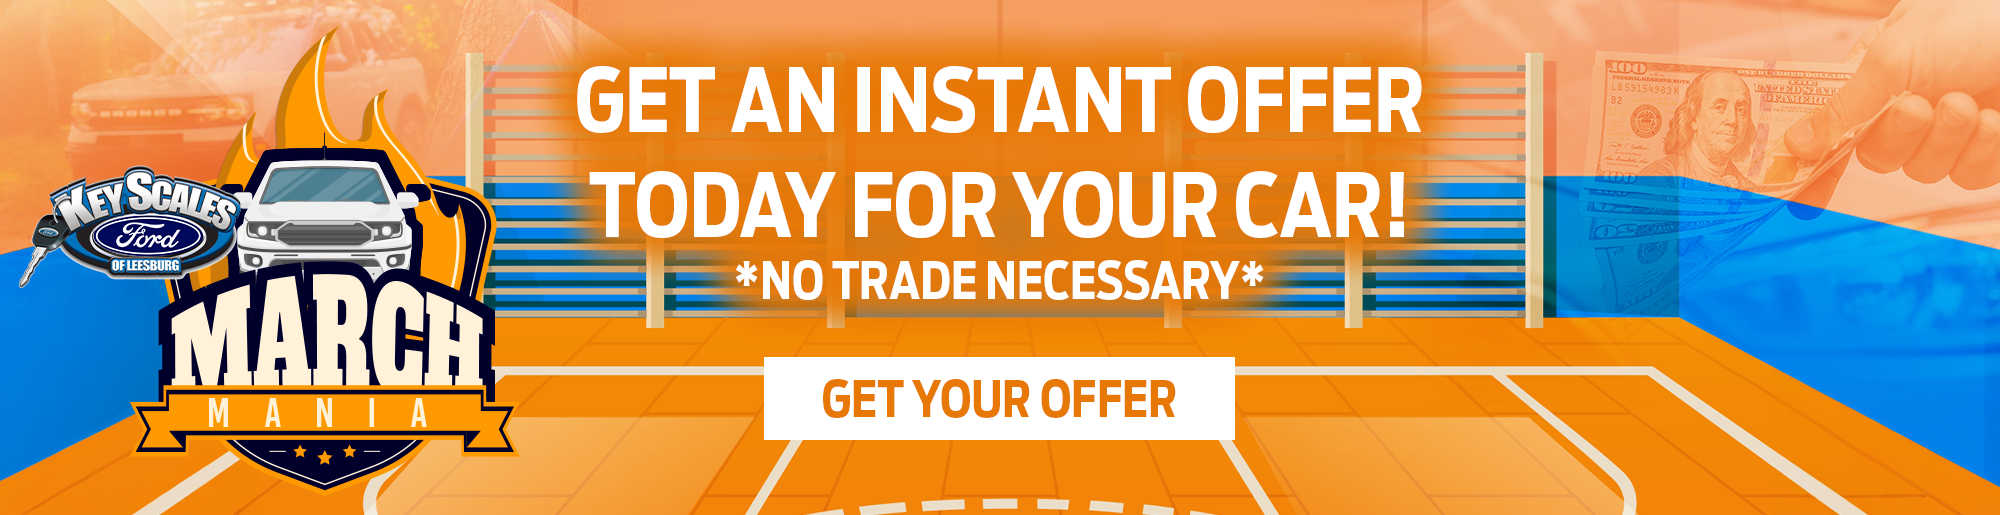 Get an Instant offer today for your Car!